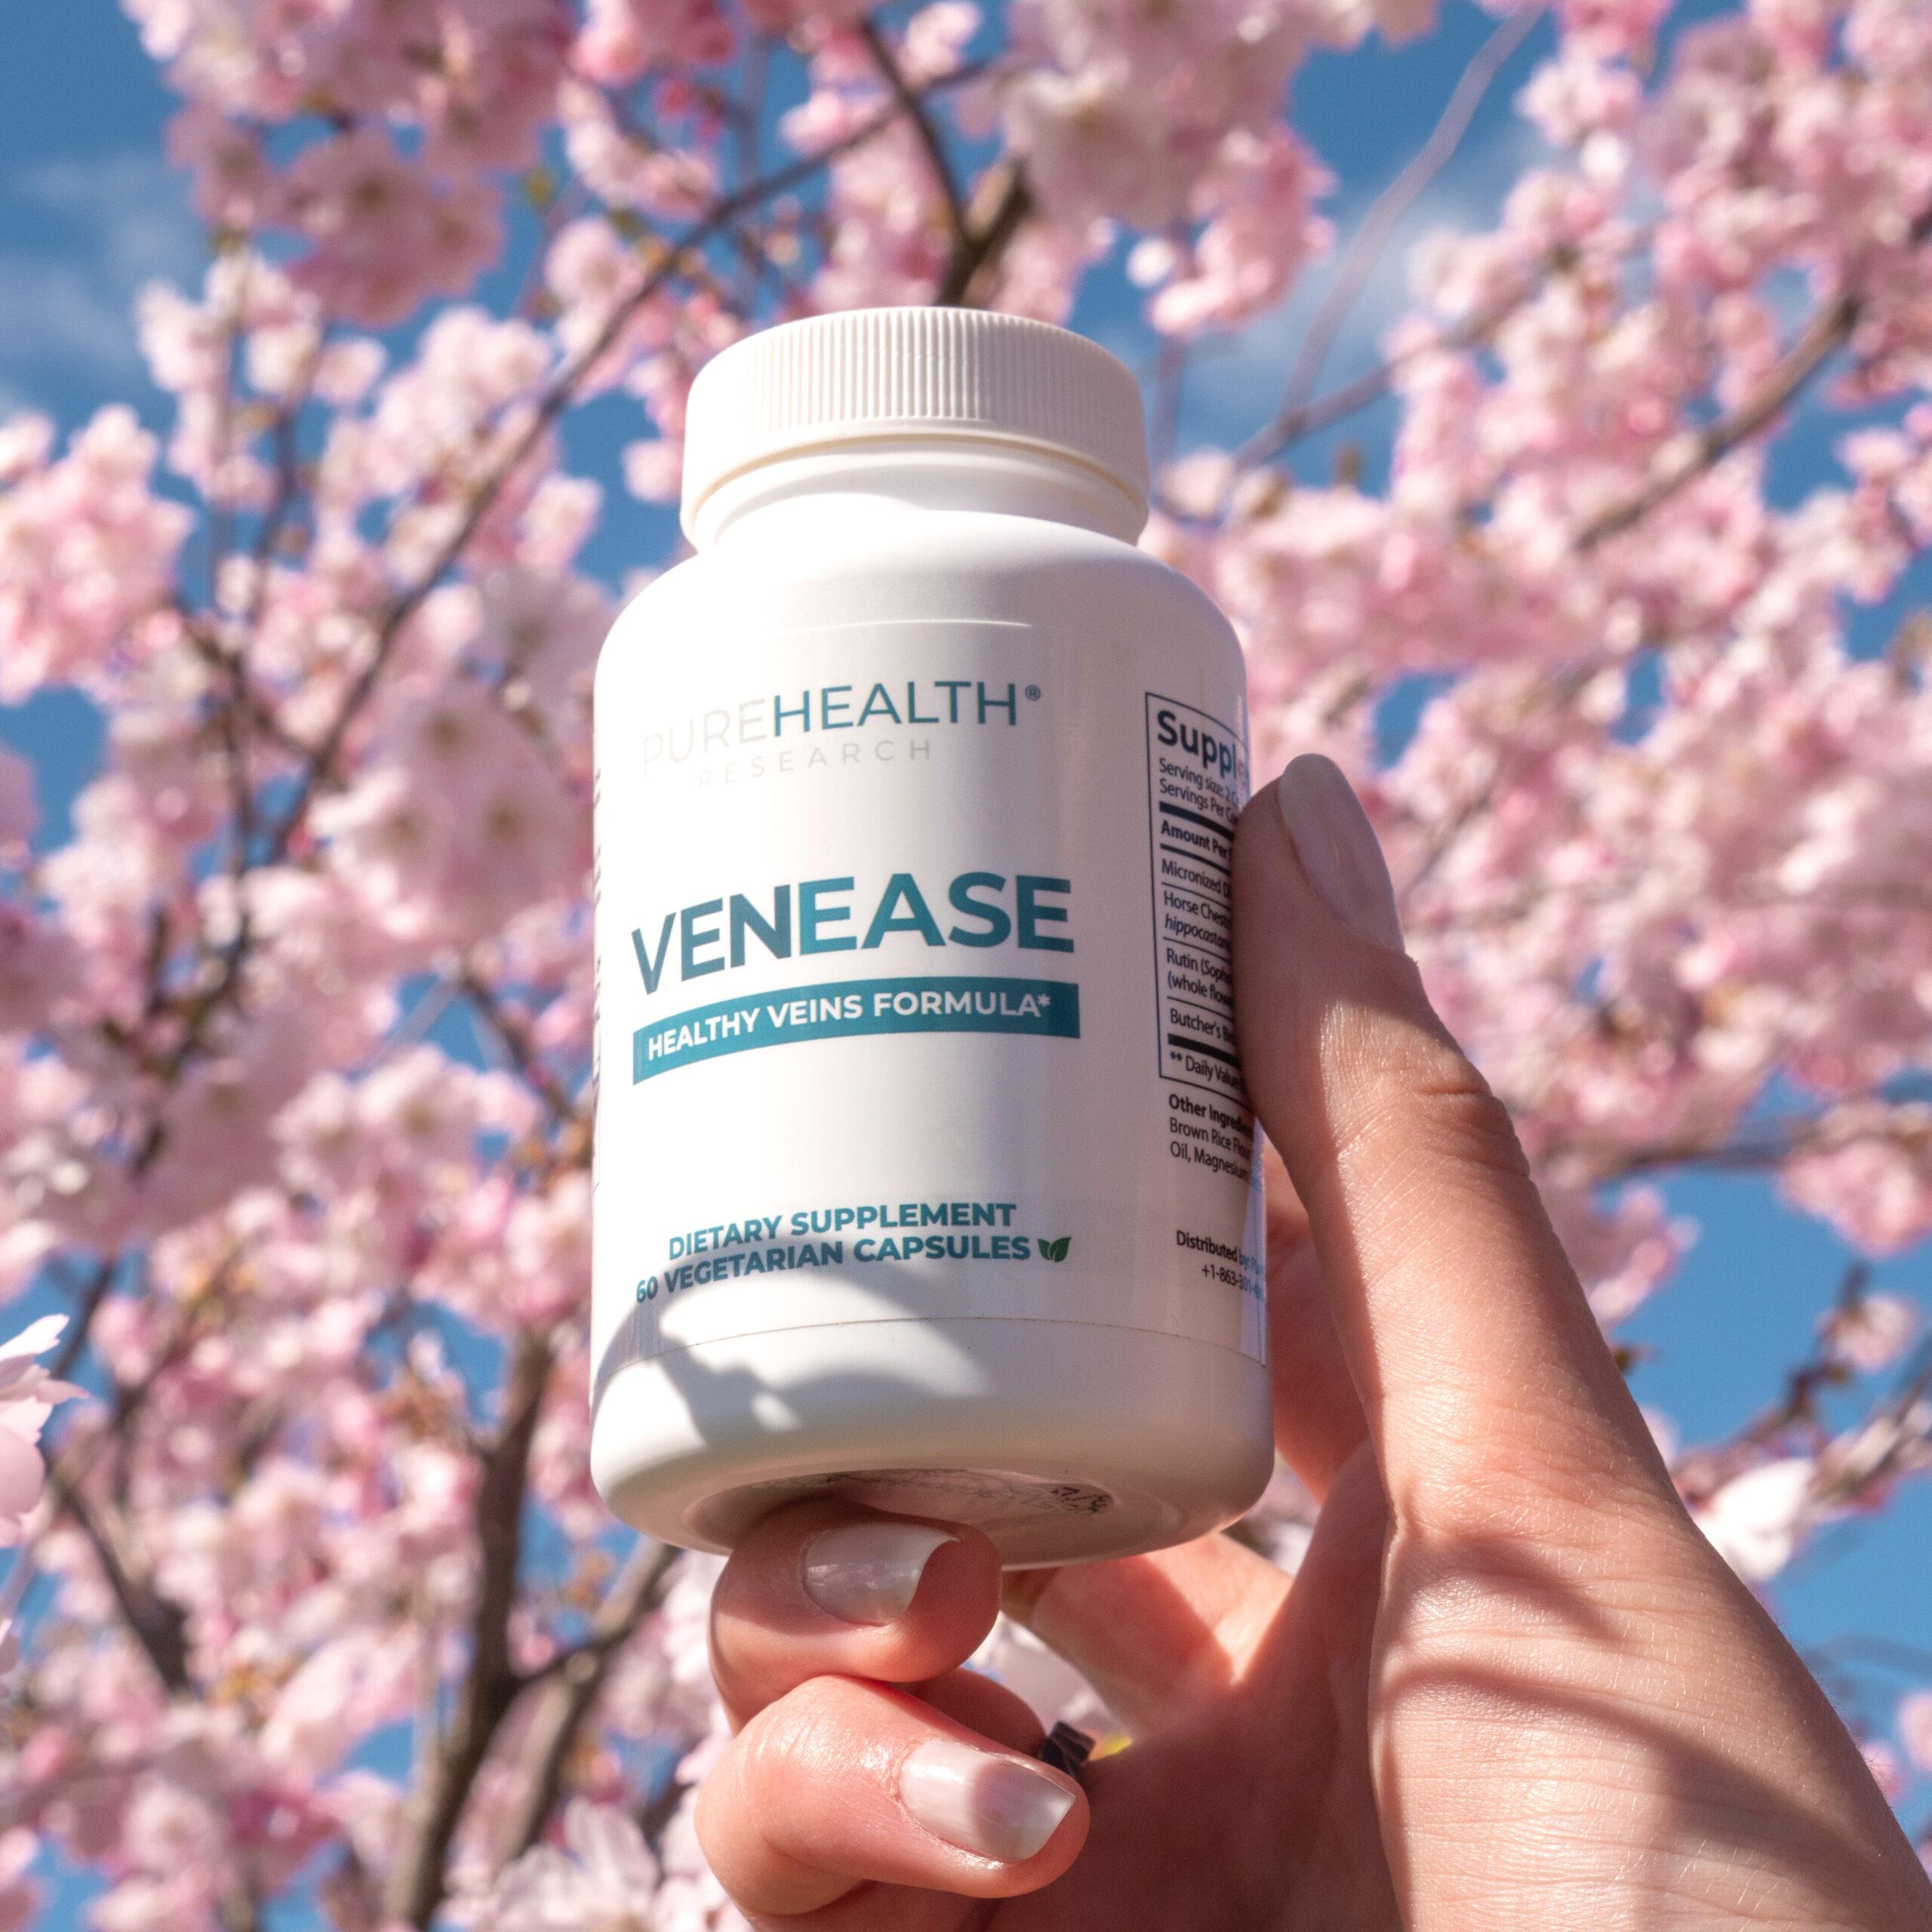 VenEase supplement by PureHealth Research